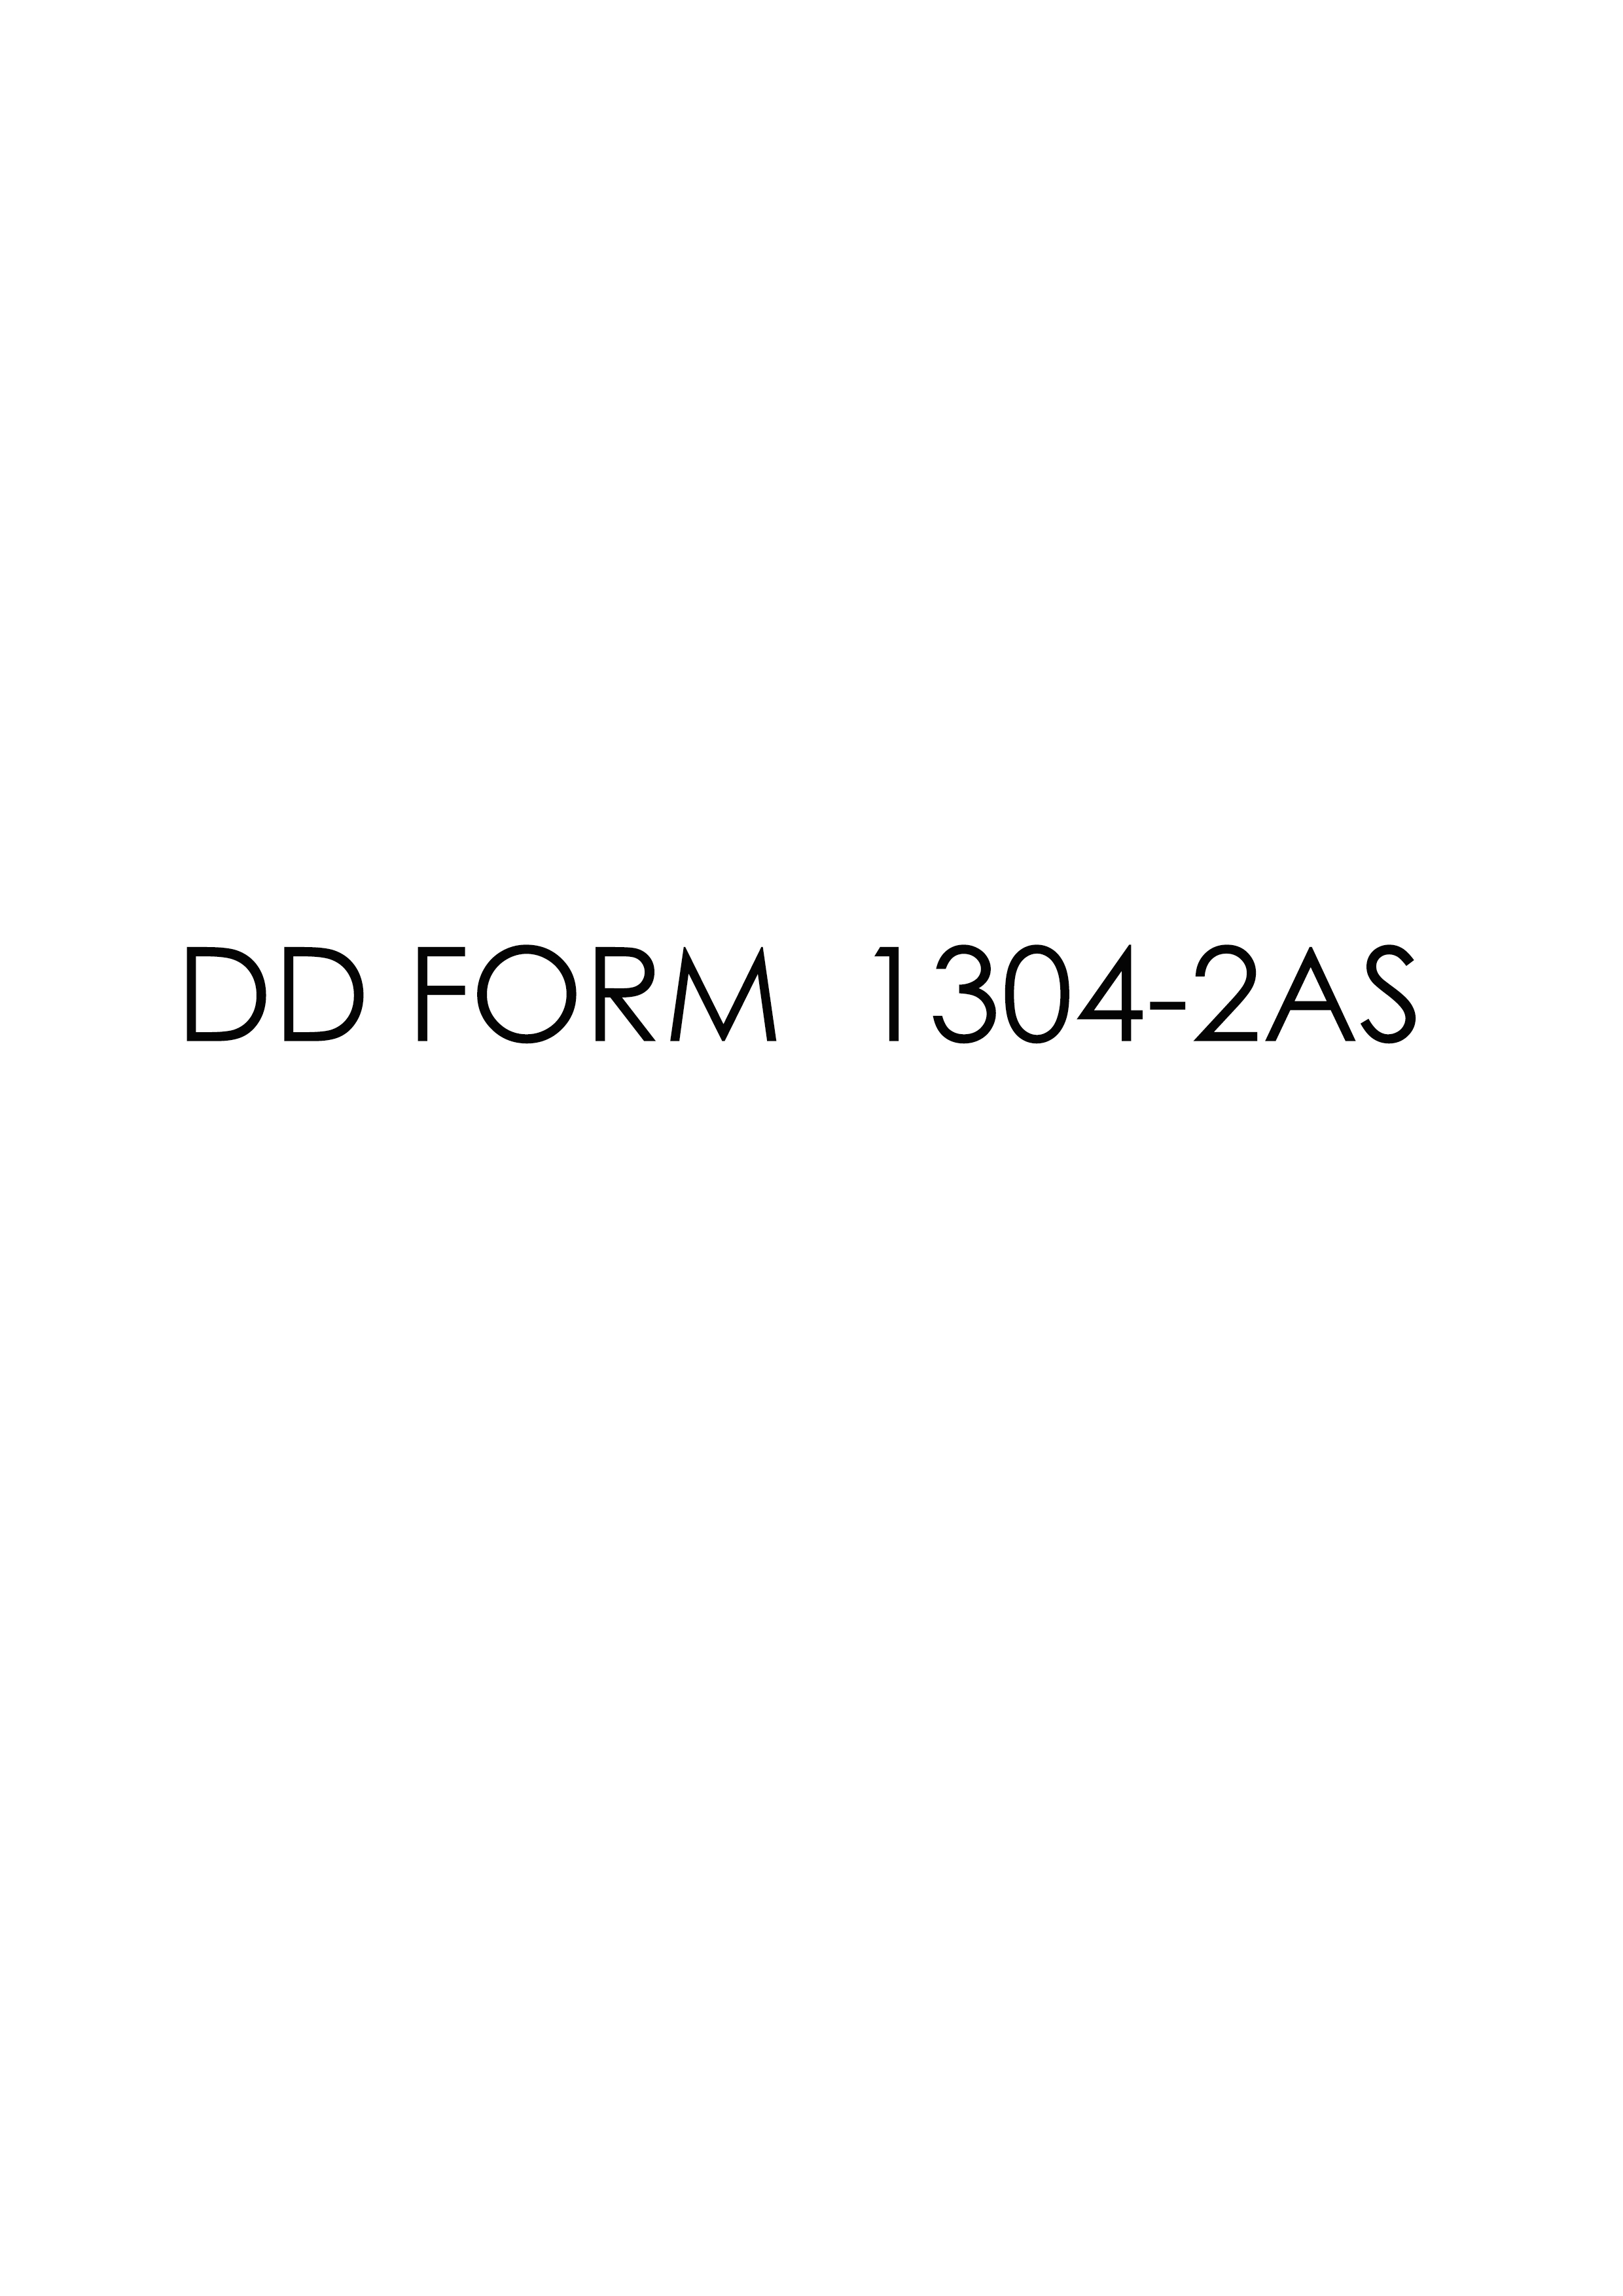 Download dd Form 1304-2AS